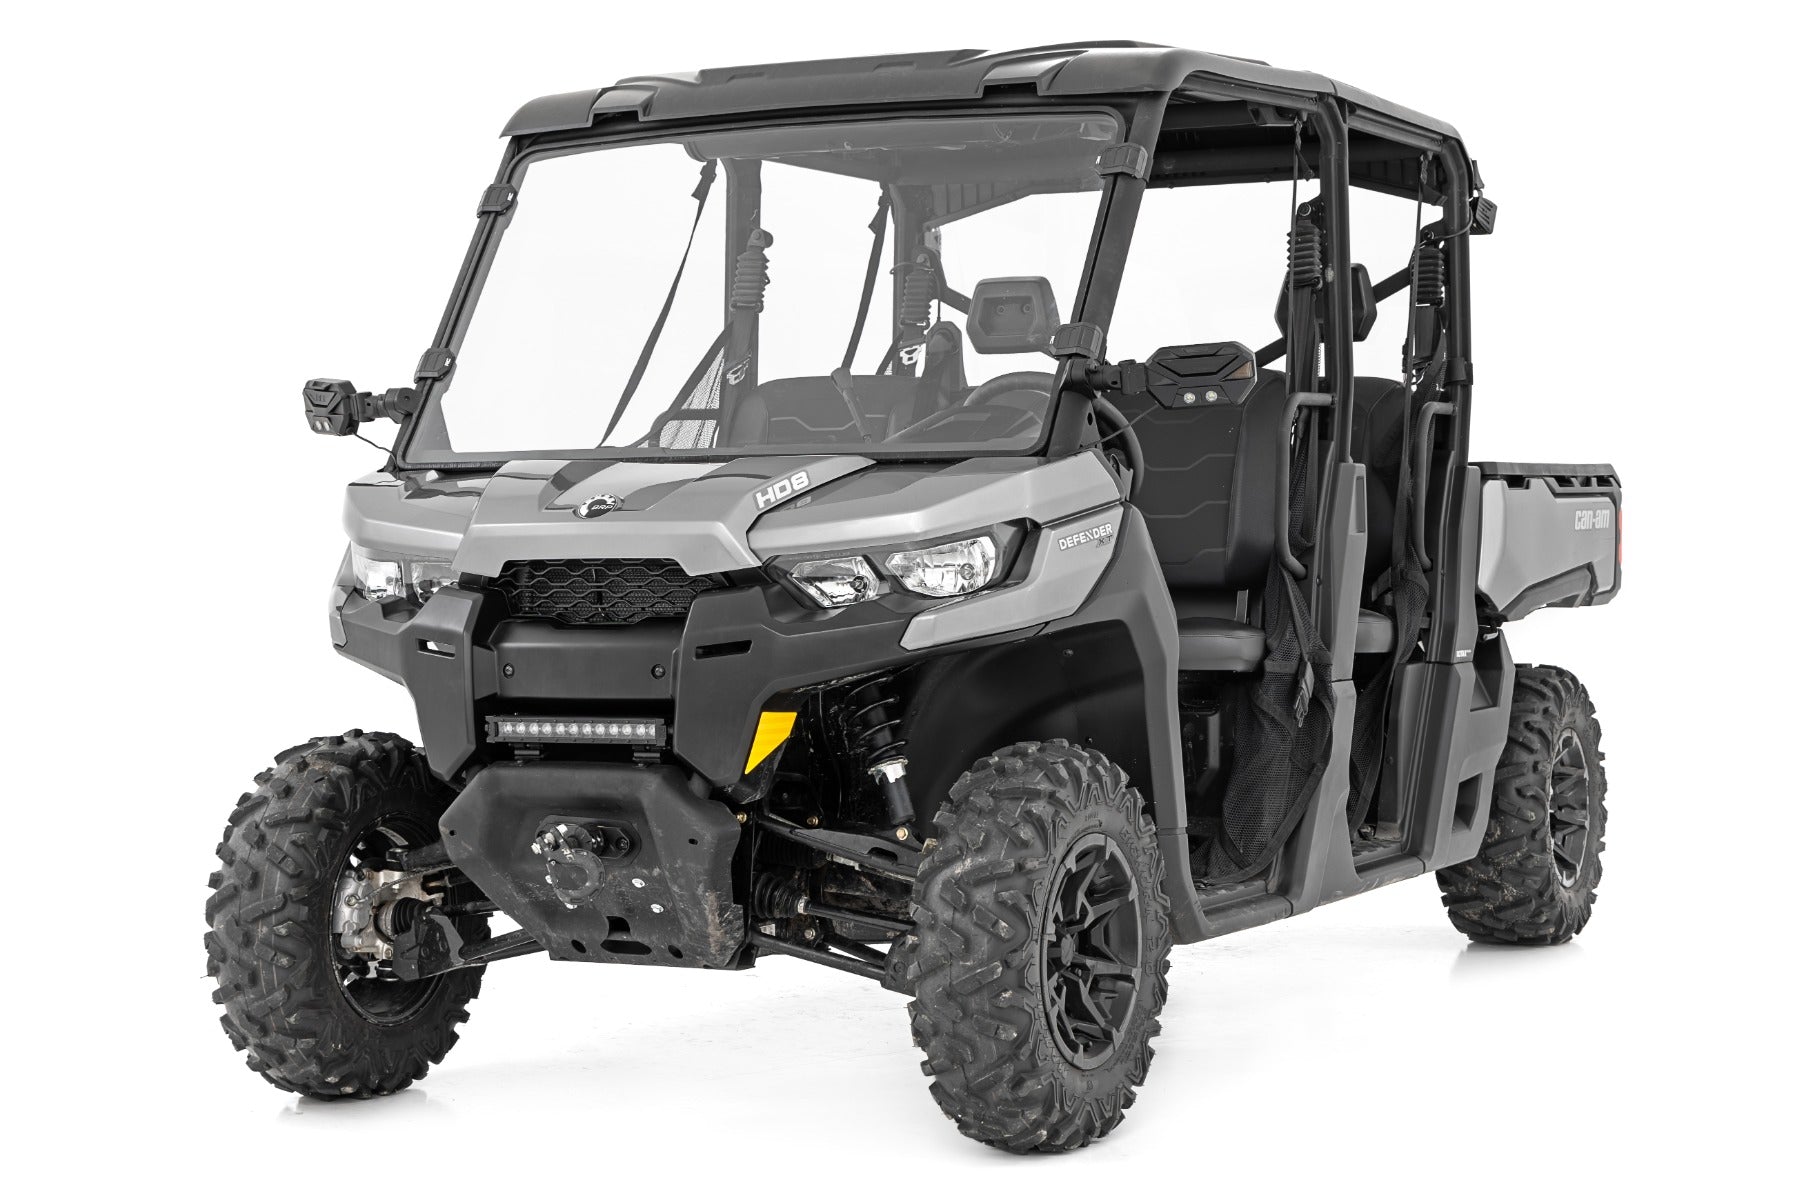 Full Windshield | Scratch Resistant | Can-Am Defender HD 8/HD 9/HD 10